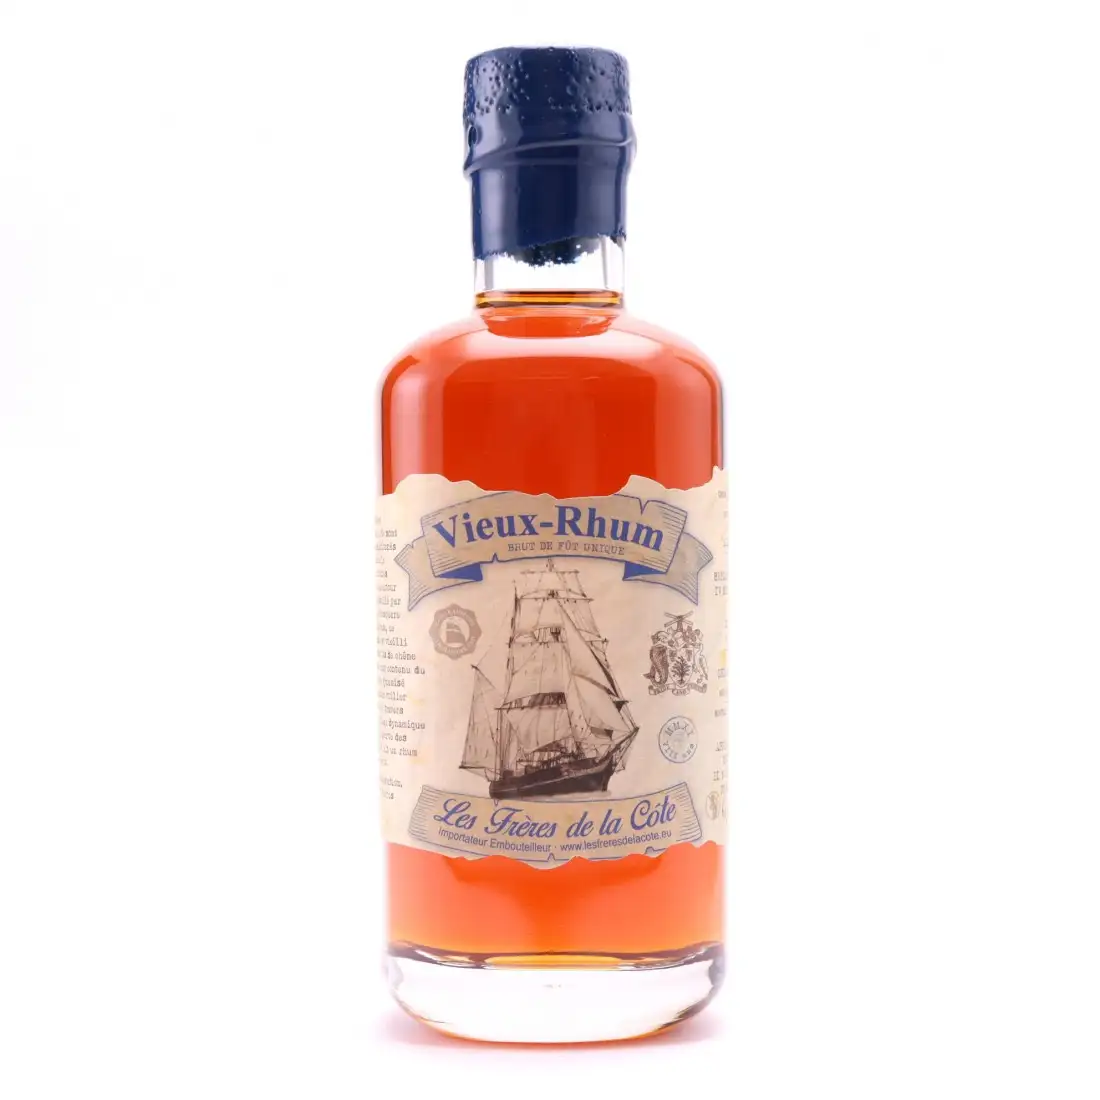 Image of the front of the bottle of the rum Vieux-Rhum